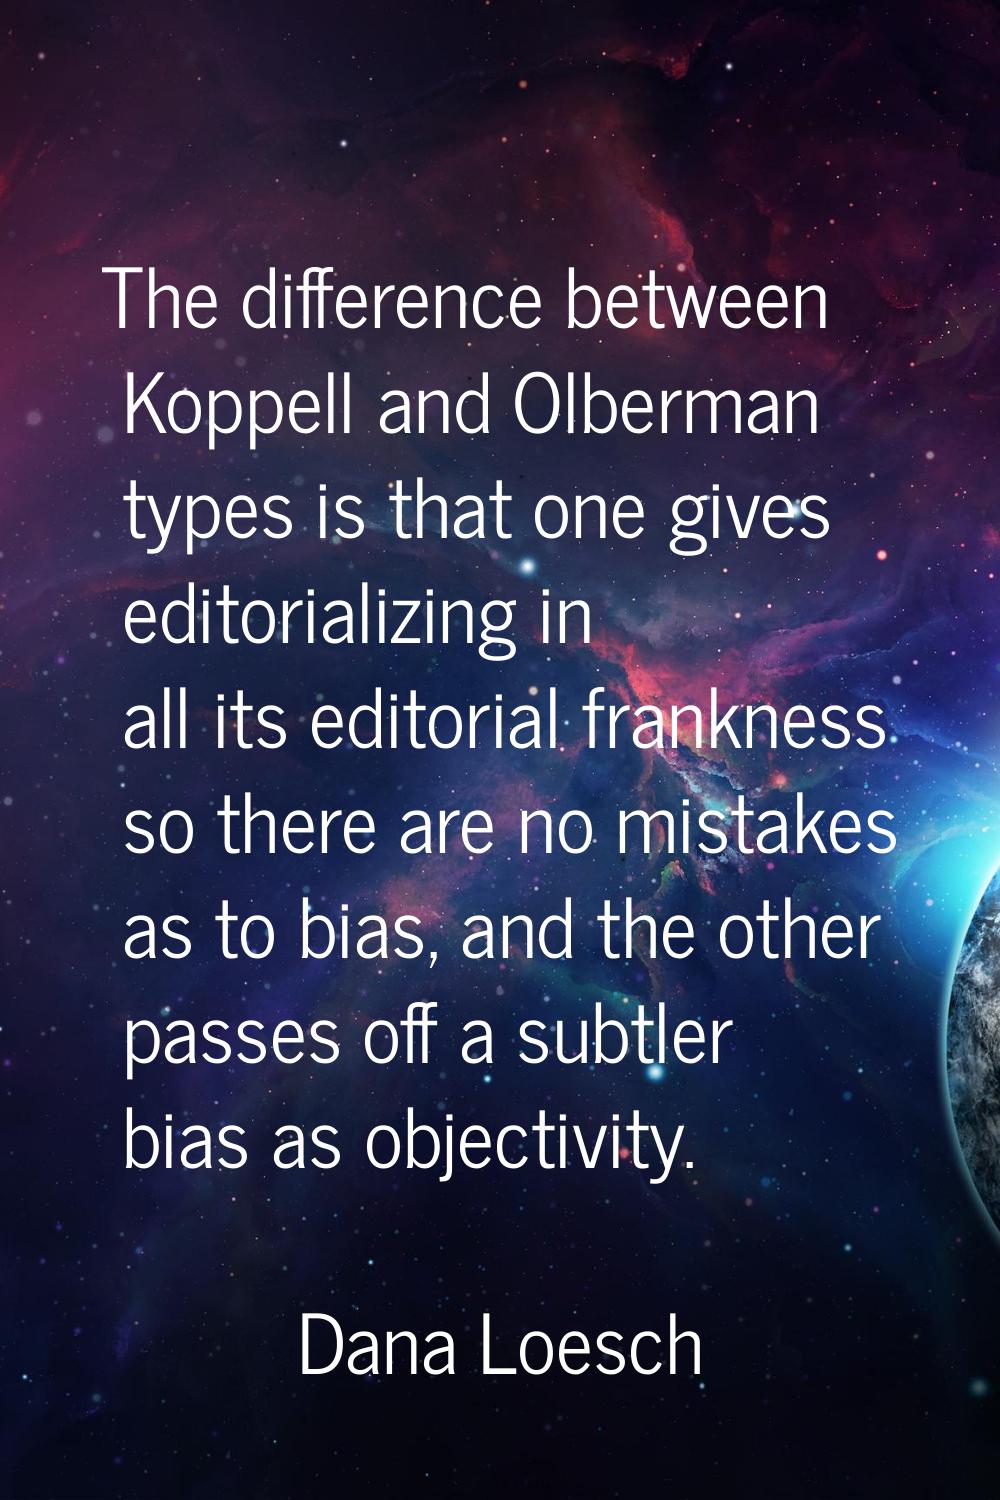 The difference between Koppell and Olberman types is that one gives editorializing in all its edito